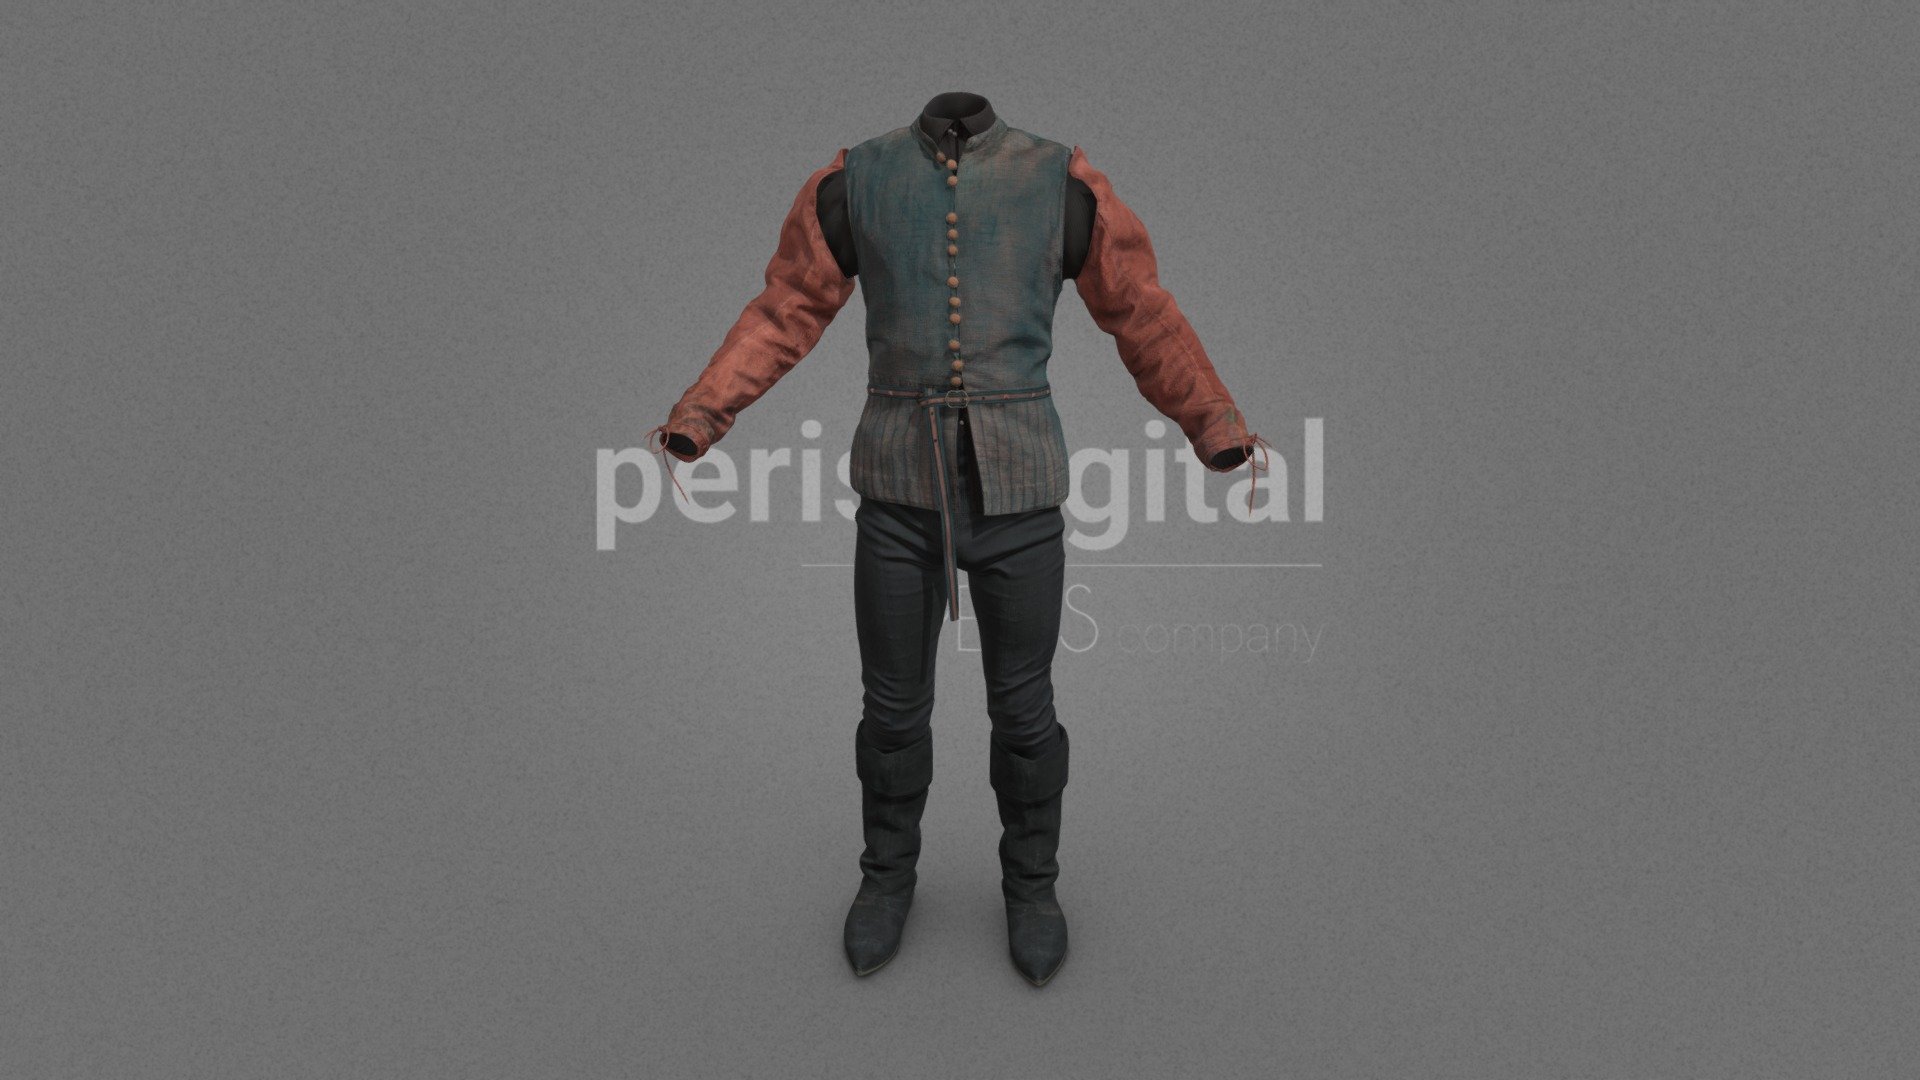 Blue jacket with red attachable sleeves and yellow buttons, blue and yellow belt, black shirt, black trousers, black high boots

They are optimized for use in 3D scenes of medium/high polygonalization and optimized for rendering.

We do not include characters, but they are positioned for you to include and adjust your own character.

They have a model LOW (_LODRIG) inside the Blender file (included in the AdditionalFiles), which you can use for vertex weighting or cloth simulation and thus, make the transfer of vertices or property masks from the LOW to the HIGH** model.

**We have included the texture maps in high resolution, so you can make extreme point of view with your 3D cameras, as well as the Blender file so you can edit any aspect of the set.

Enjoy it.

Web: https://peris.digital/ - Medieval-Renaissance Series - Man 05 - Buy Royalty Free 3D model by Peris Digital (@perisdigital) 3d model